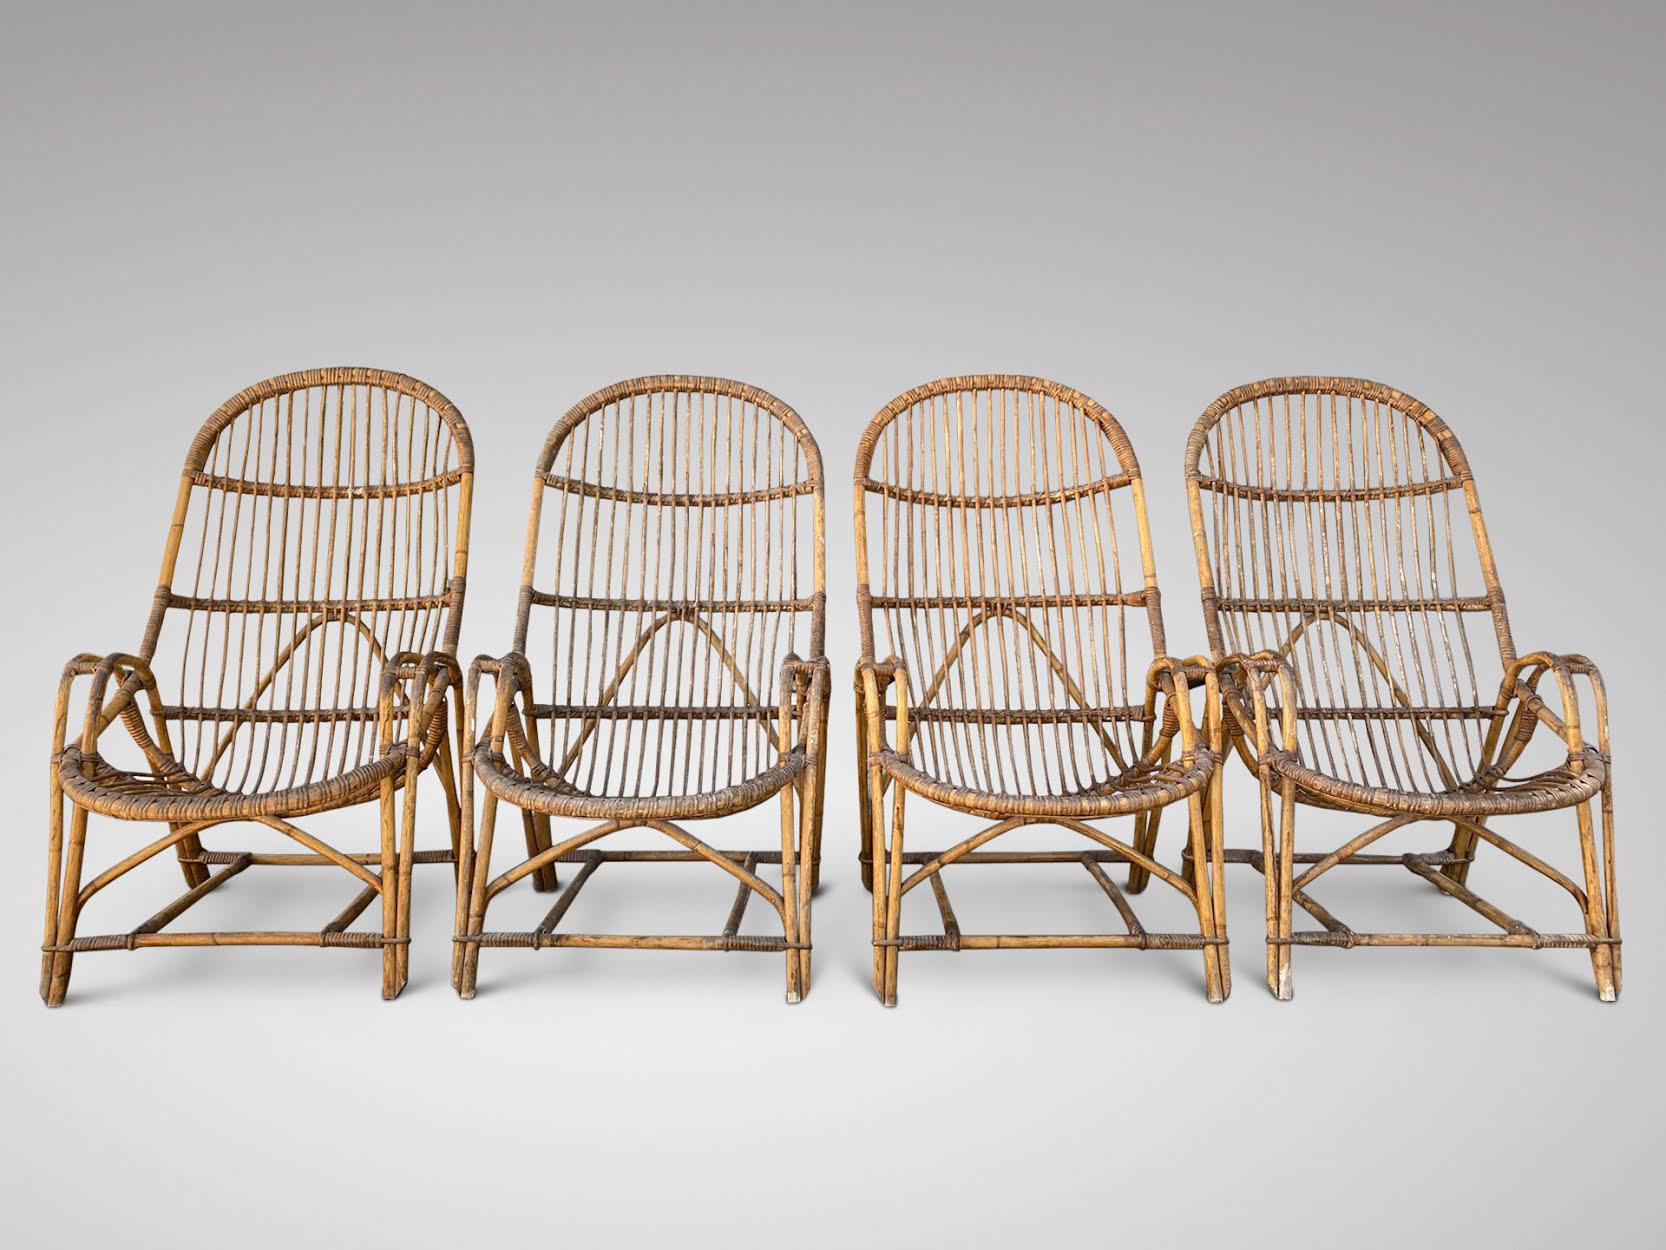 SOLD/SET OF 4 BAMBOO ARMCHAIRS IN THE MANNER OF FRANCO ALBINI